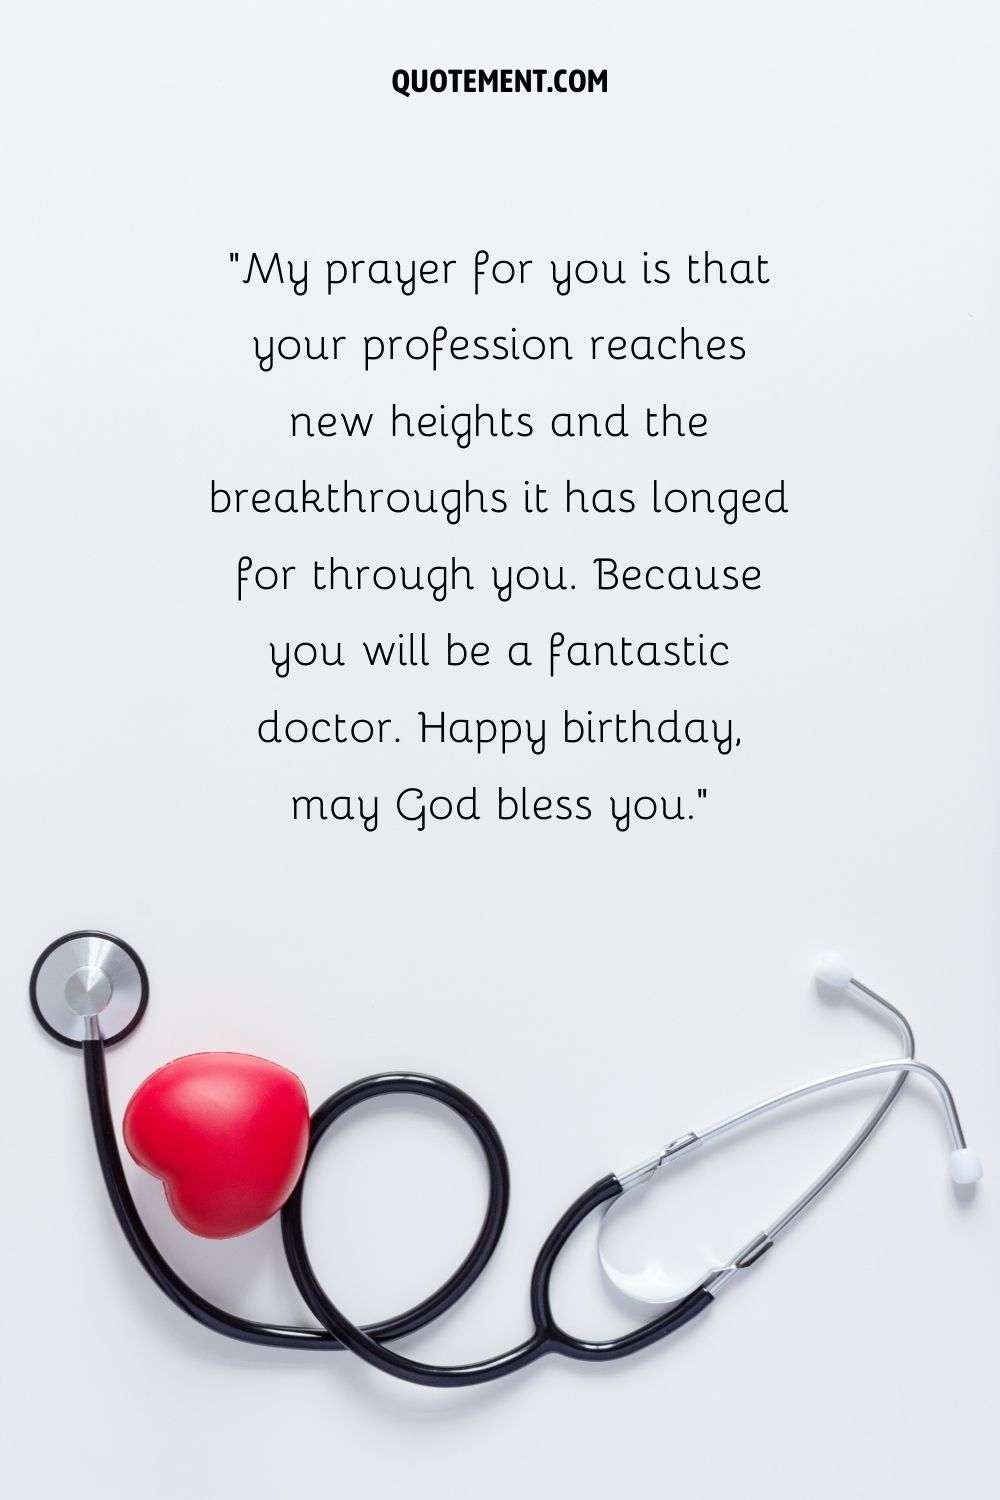 medical equipment representing birthday quote for future doctor